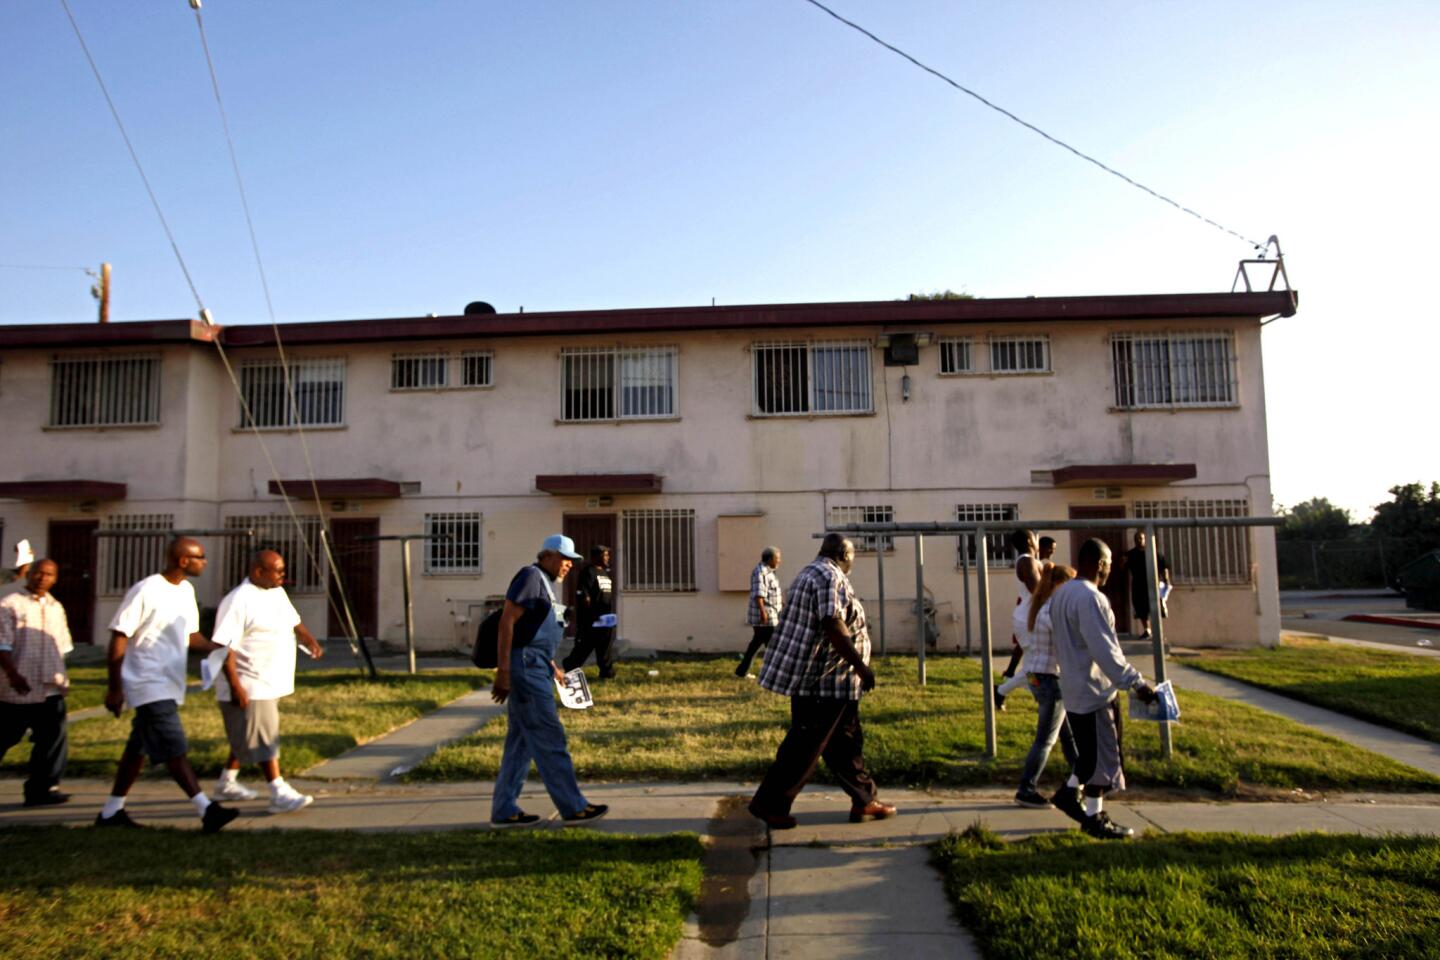 Members of Project Fatherhood walk through Jordan Downs in Watts to help spread the word about their program. The group aims to help young men avoid the mistakes of the older generation and be more responsible to their children.